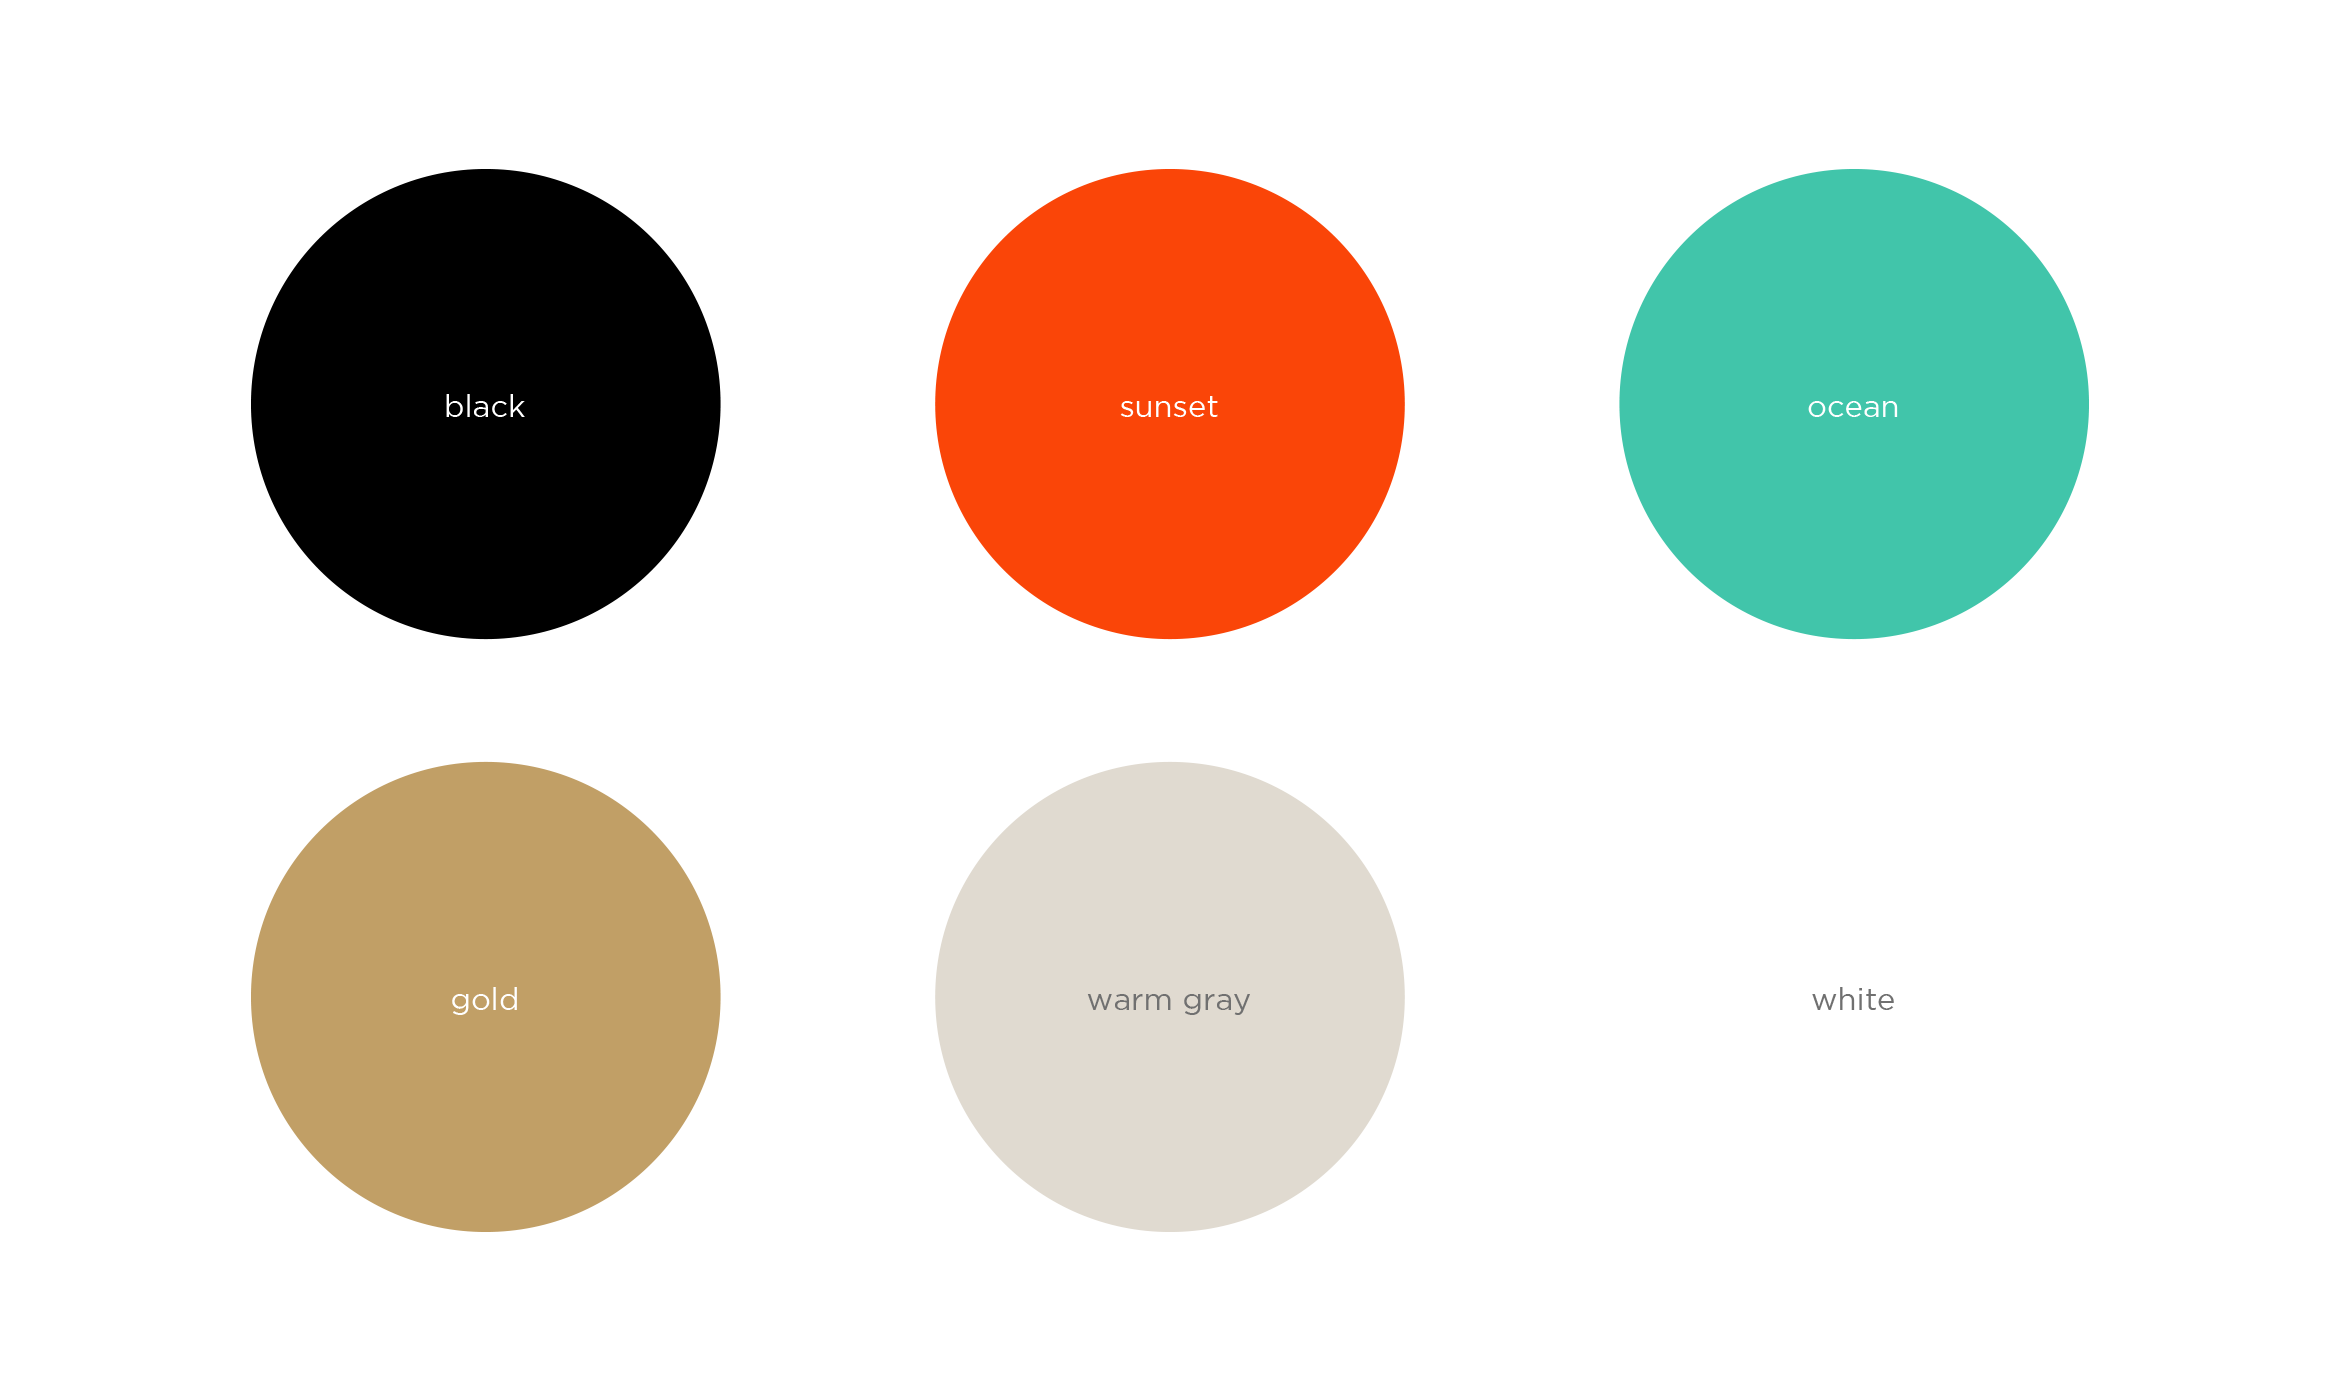 6 dots that show the brand color palette for tahiti.com: black, orange, turquoise, gold, gray and white